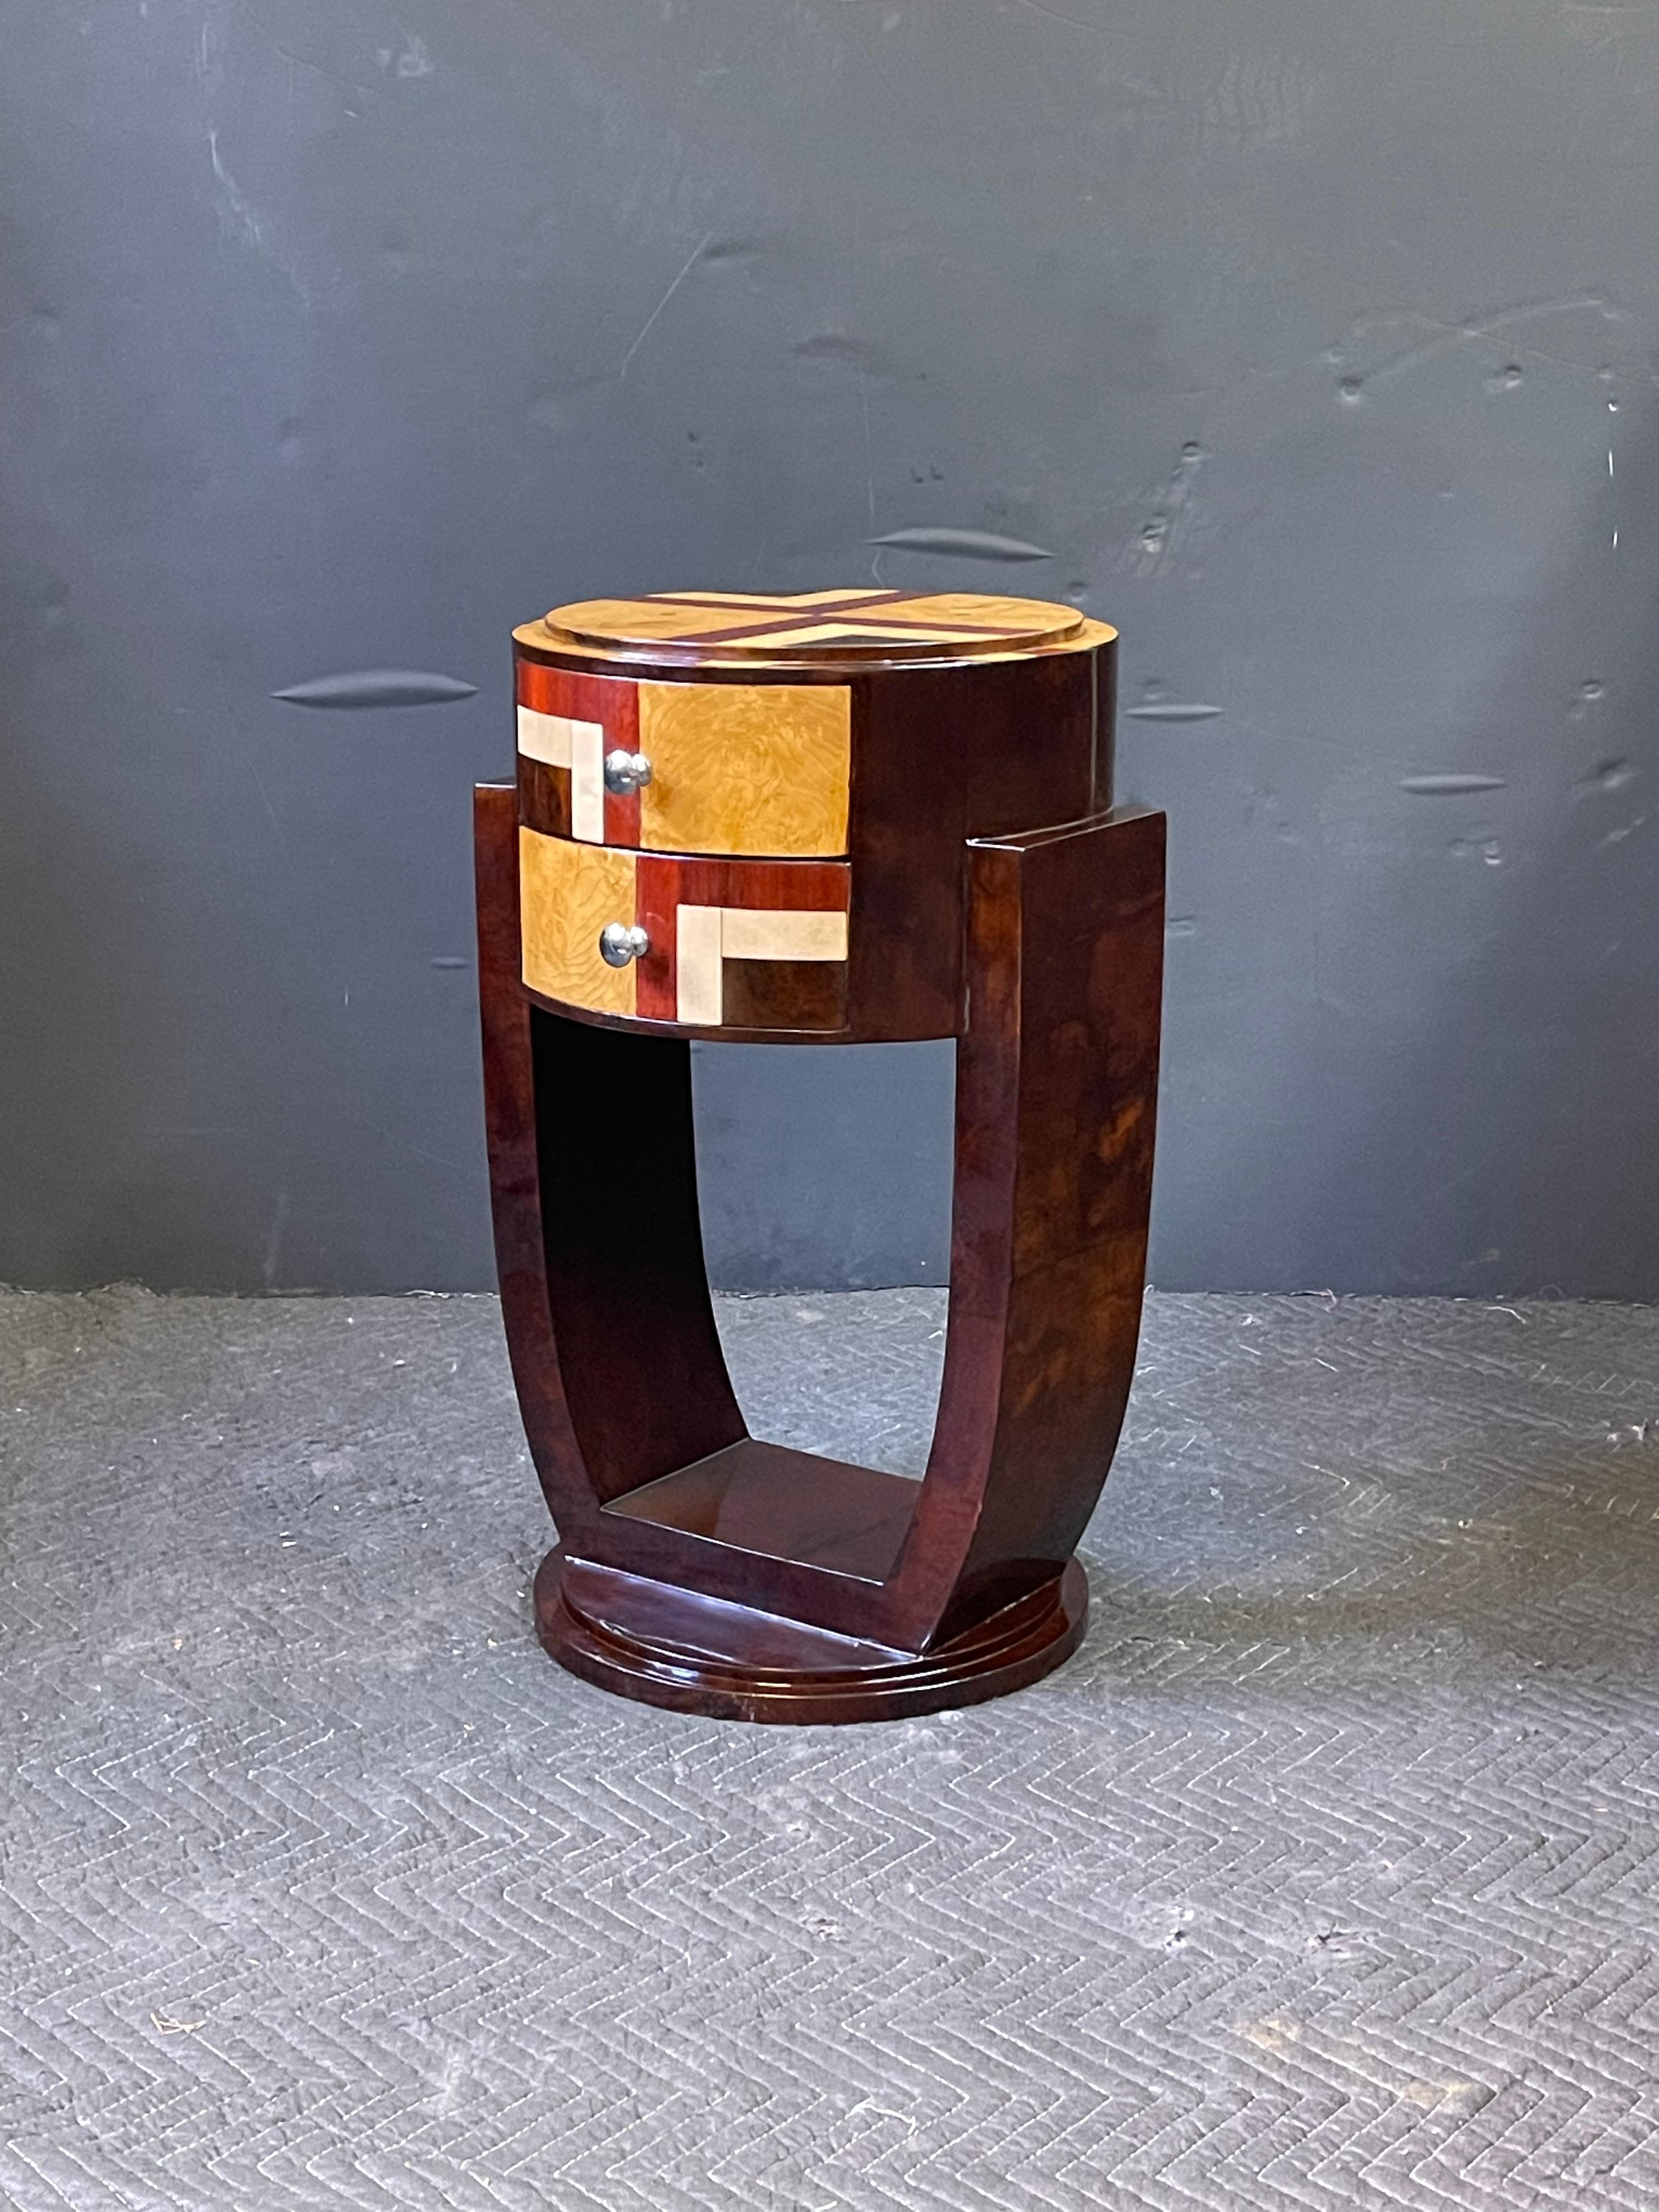 This mid 20th Century French side table is in the streamlined style of Art Deco and features prominent inlaid veneers of jacaranda, maple, and walnut. The circular table has a top of geometric inlay and steps down to a frieze containing two drawers